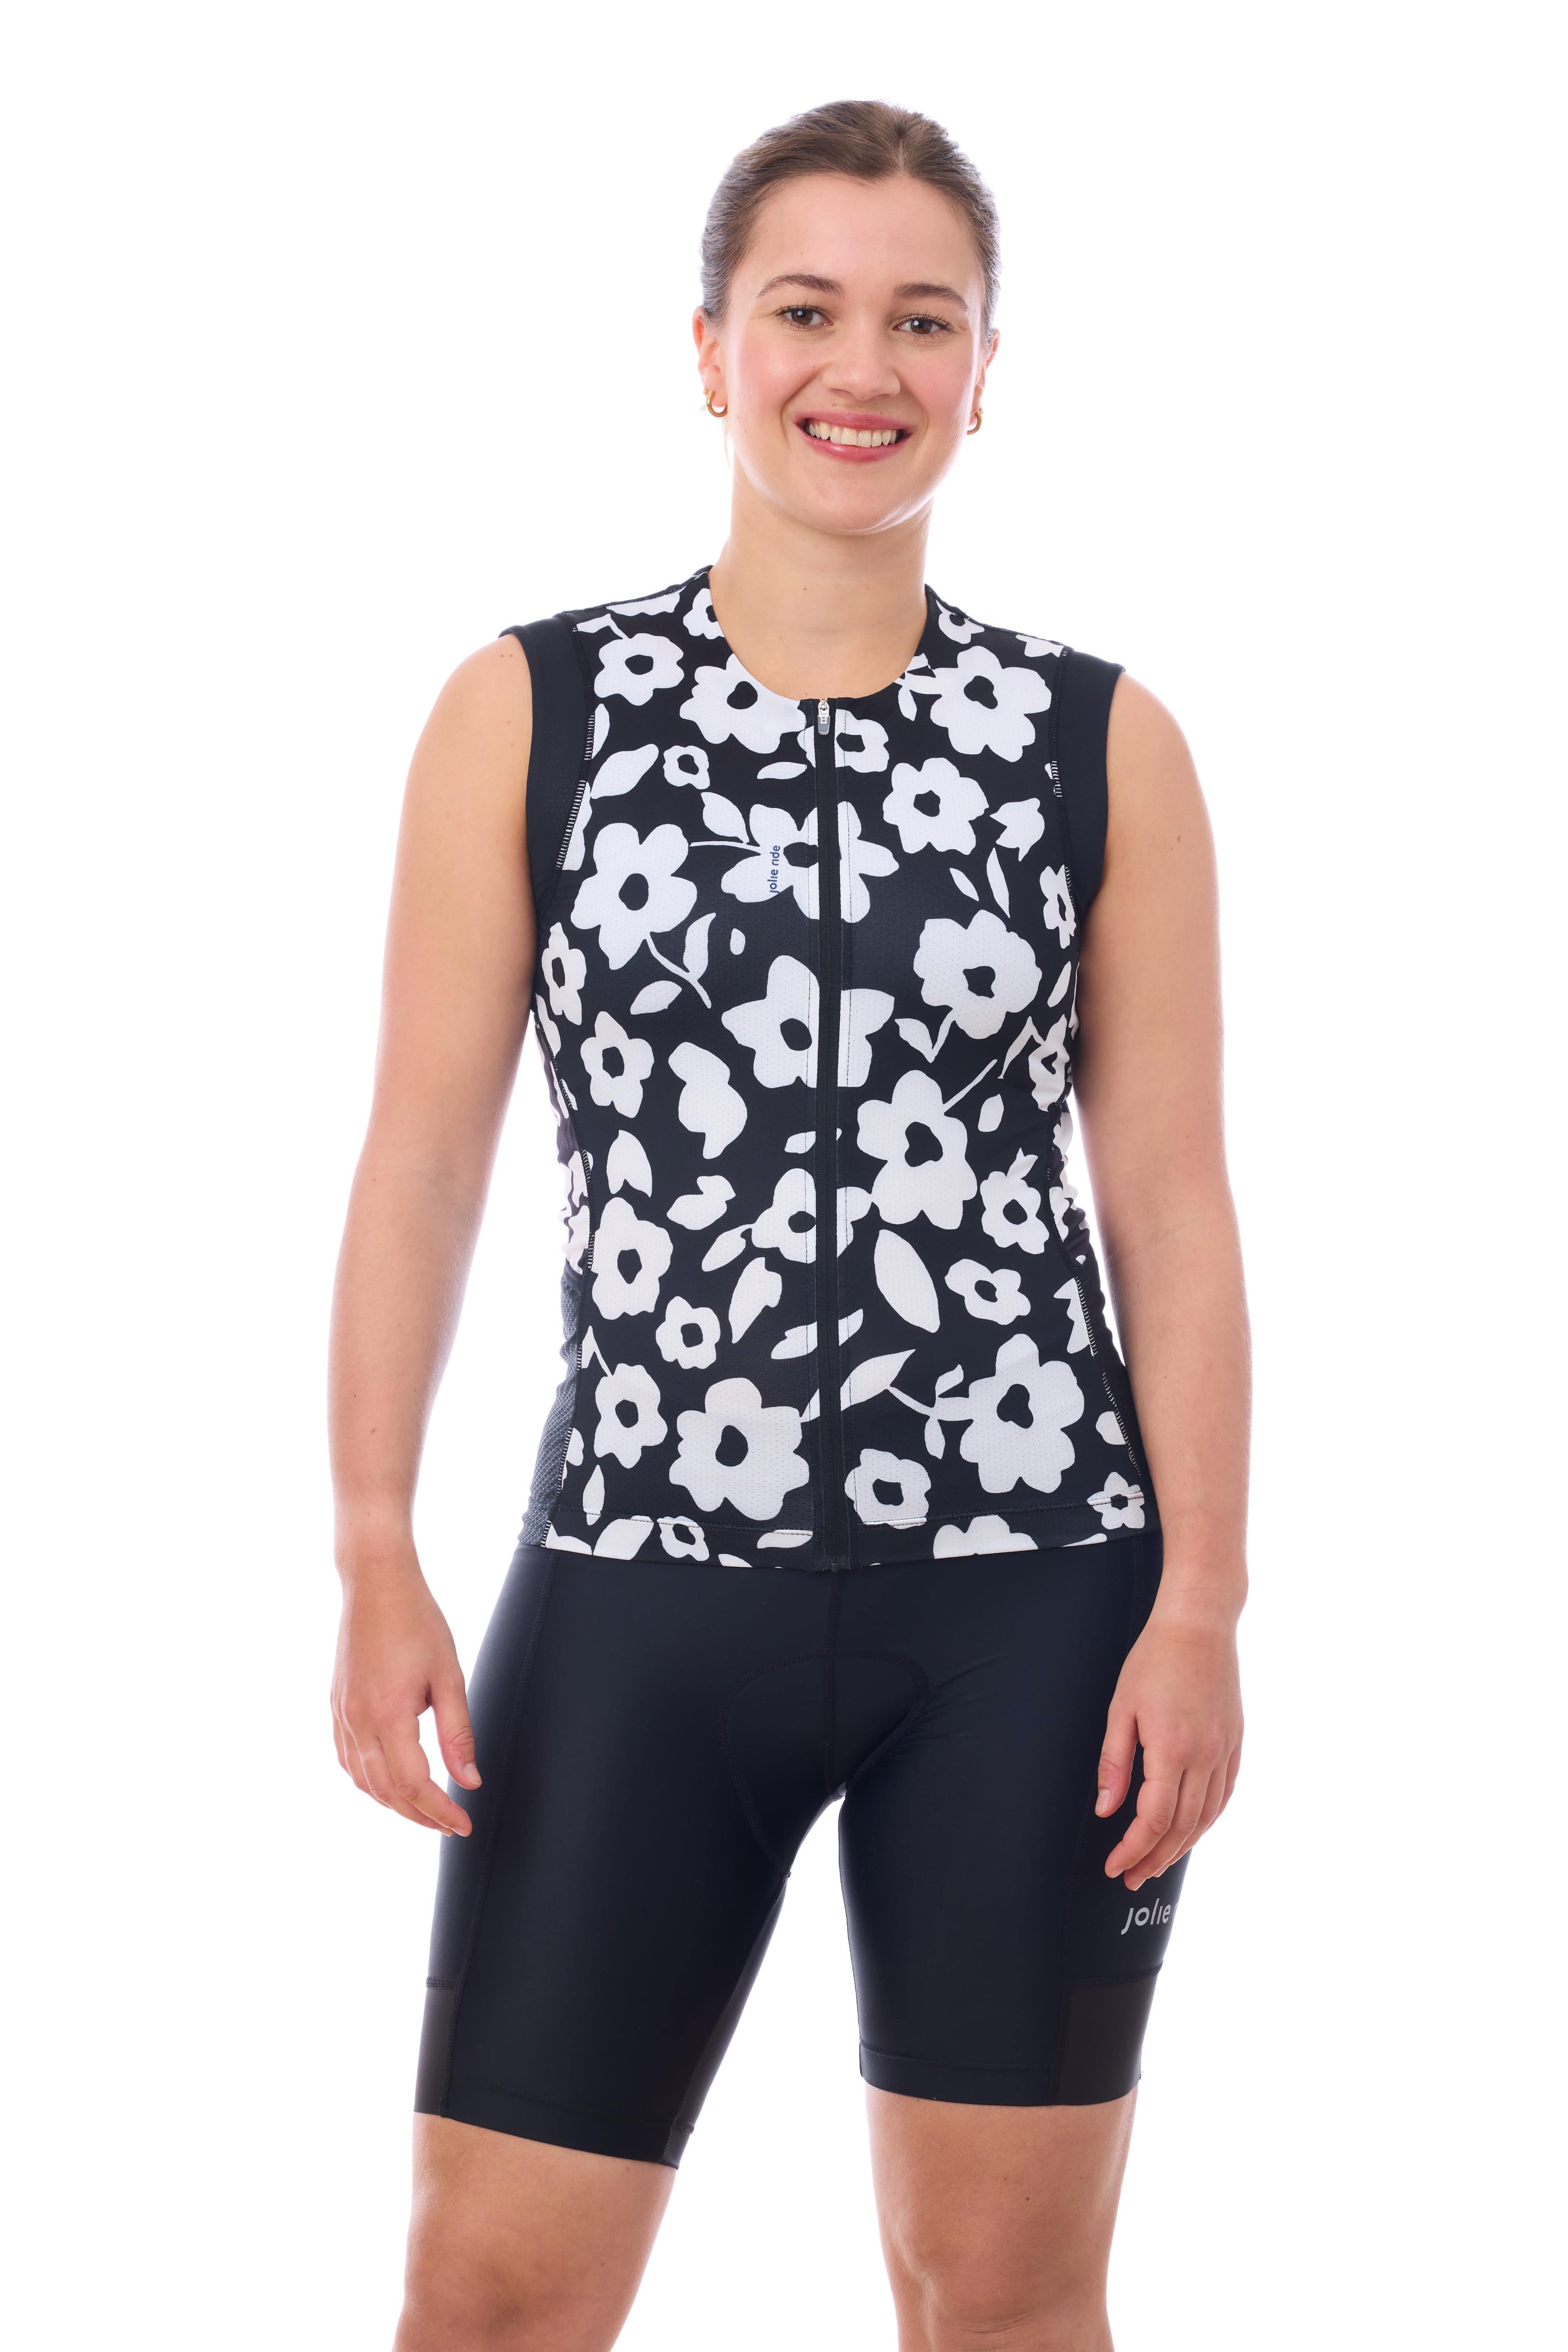 JolieRide Tank top sleeveless cycling jersey with solar protection and quick dry fabric